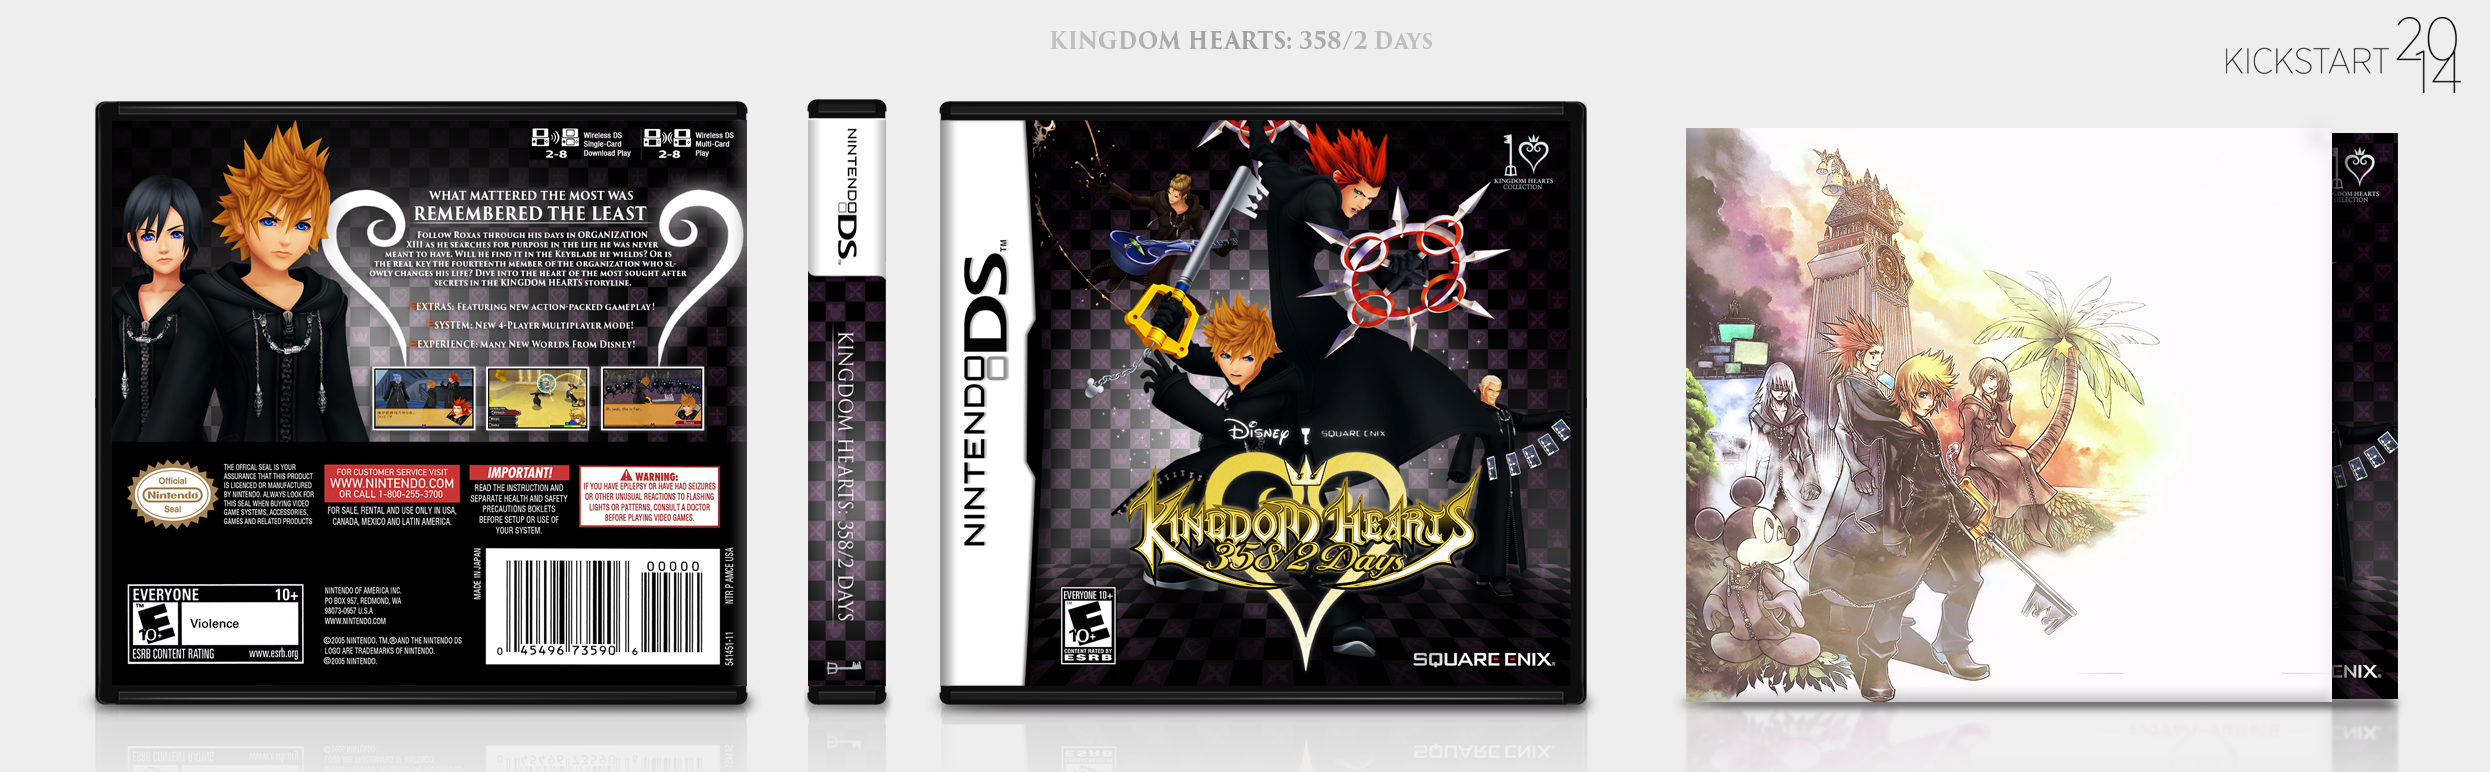 viewing-full-size-kingdom-hearts-358-2-days-box-cover